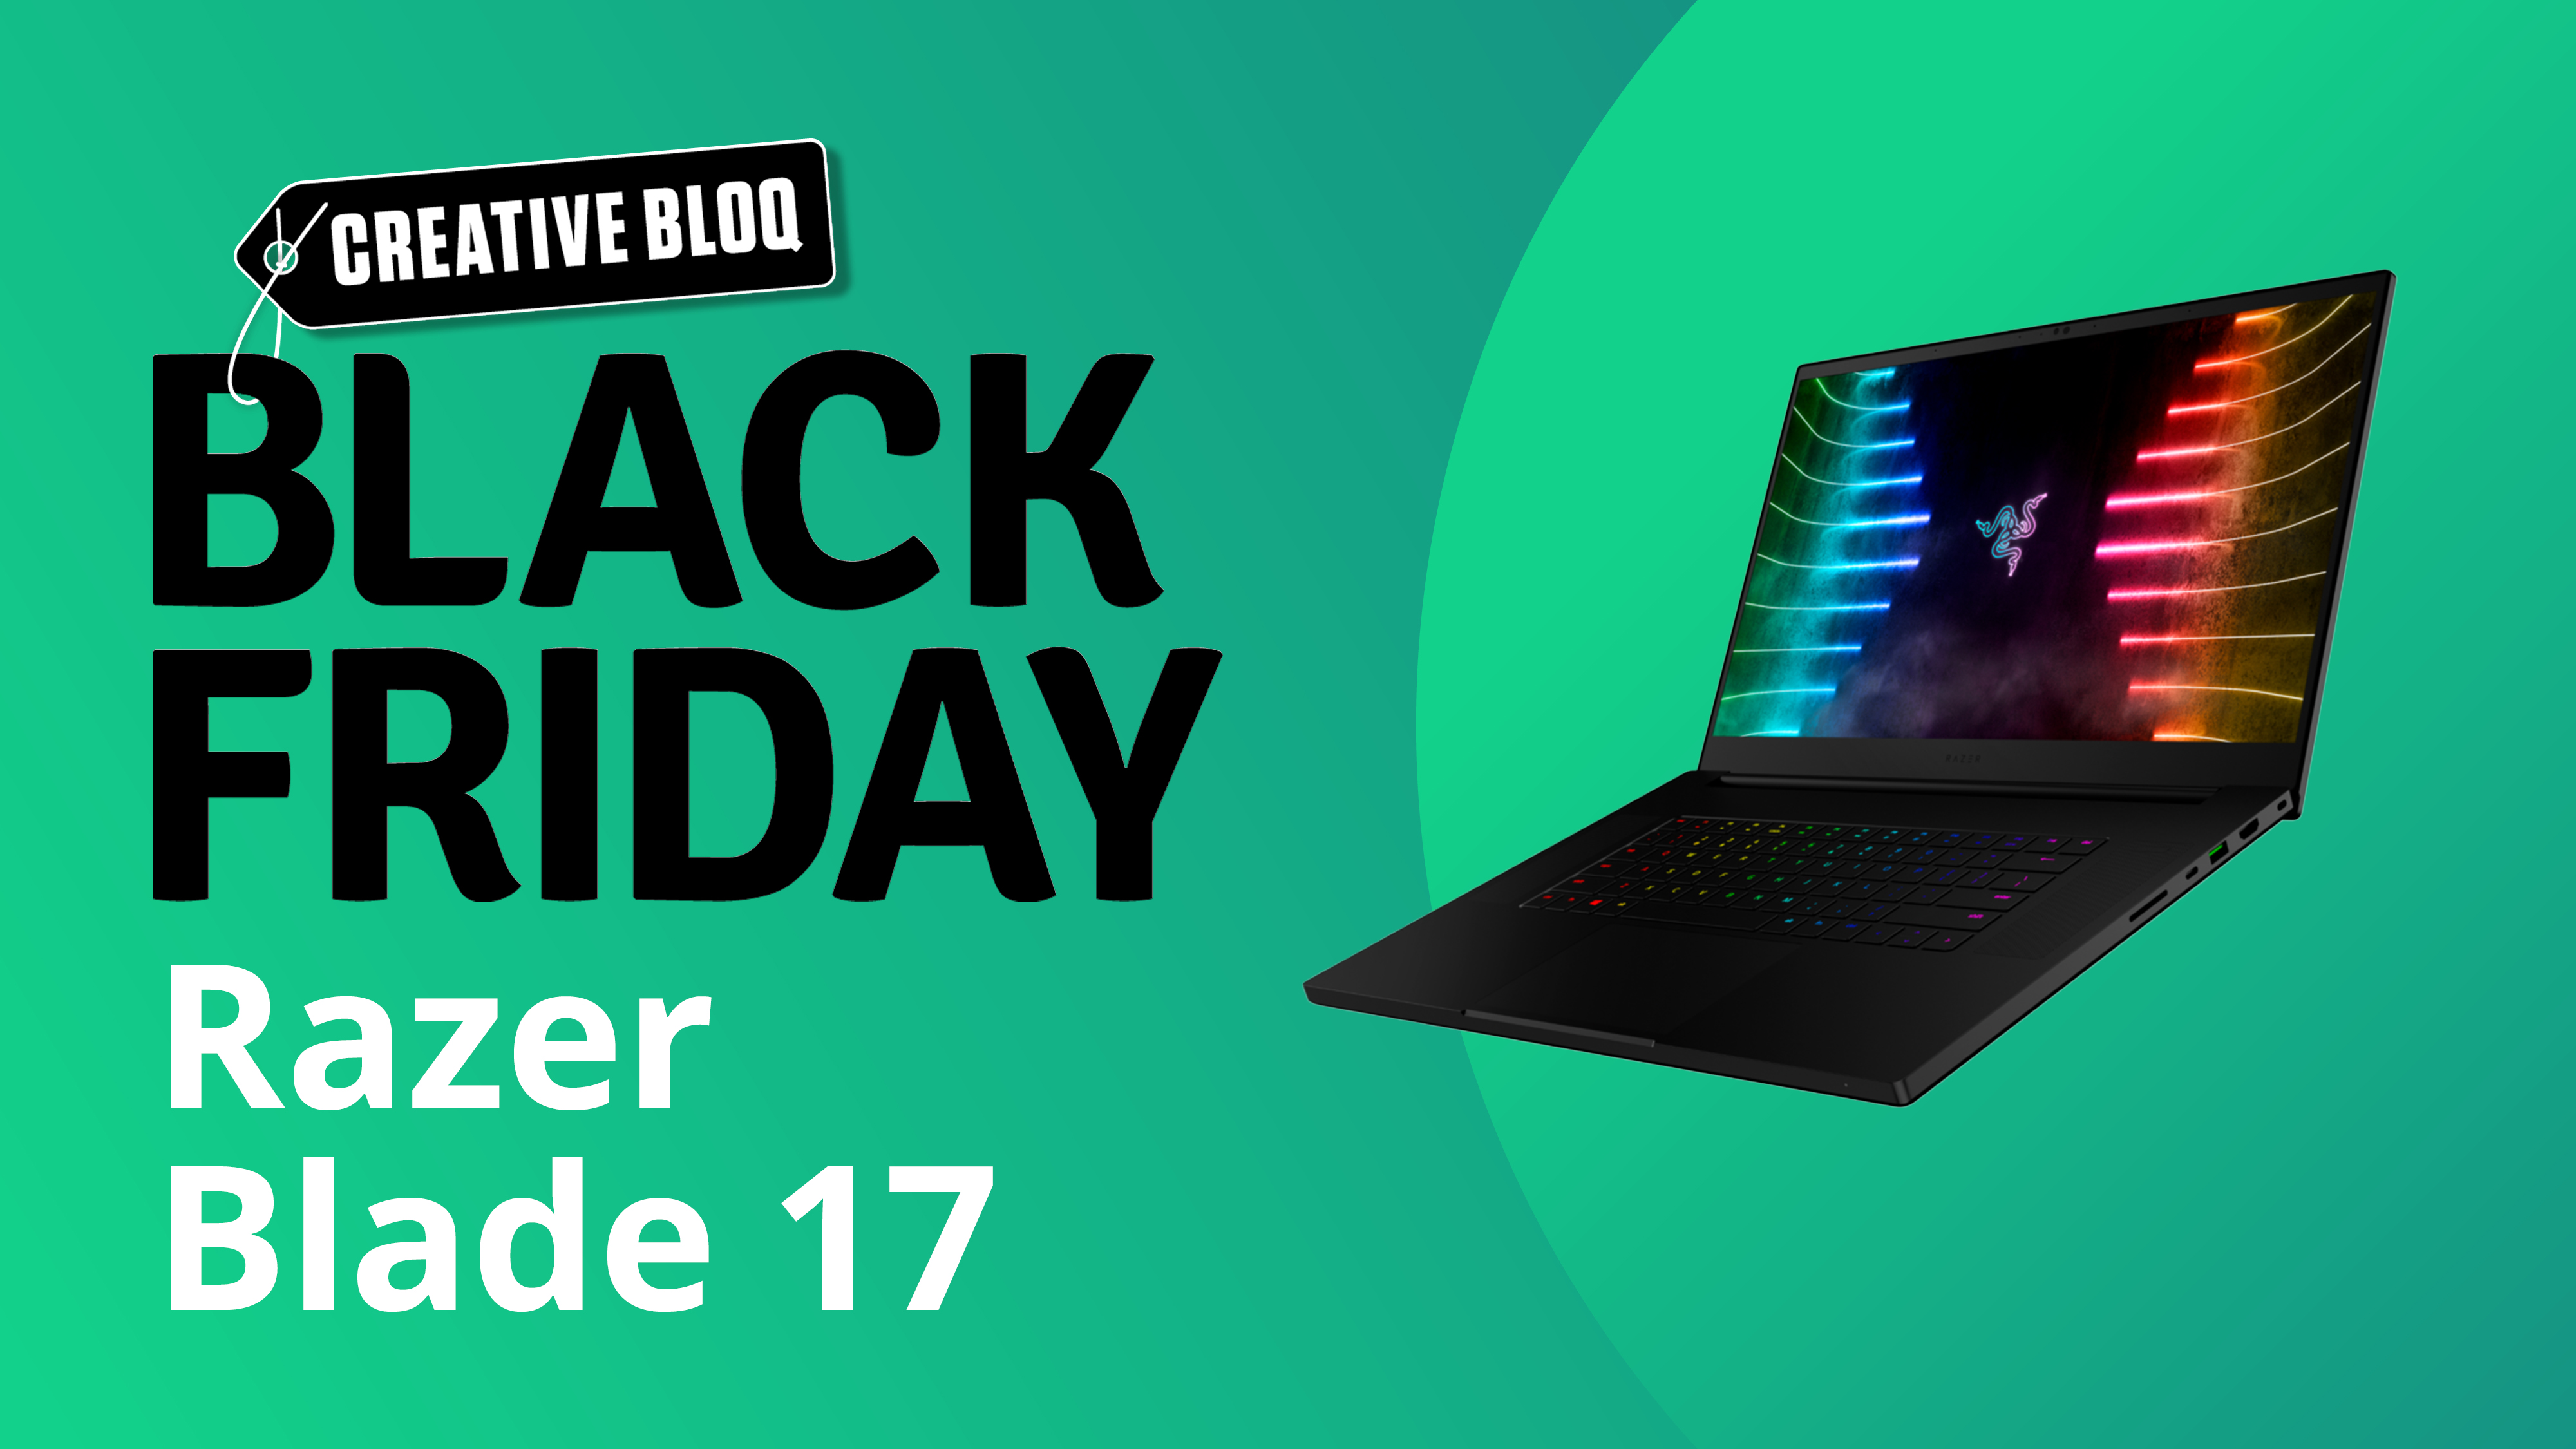 An image from Razer Black Friday, featuring a Razer Blade 17 against a green background